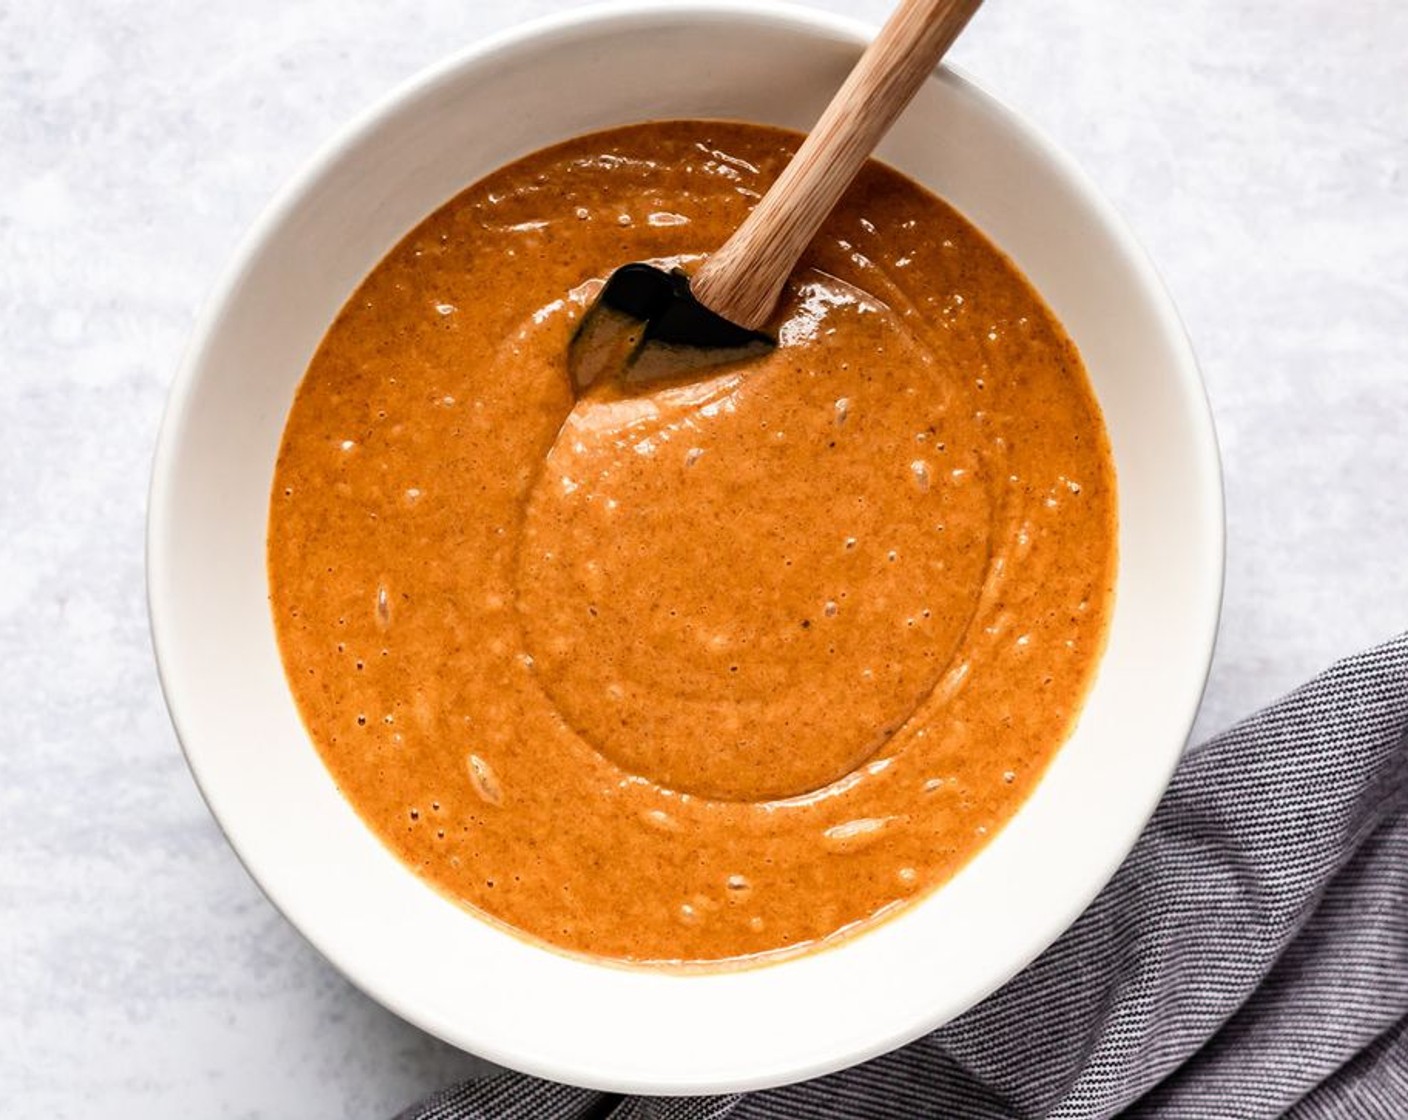 step 3 In a large bowl, stir together Canned Pumpkin Purée (1 cup), Vegetable Oil (1/3 cup), Eggs (2), and Milk (1/3 cup). Add the dry mixture to the wet mixture. Do this gradually, incorporating until no flour streaks remain. Don't over mix.